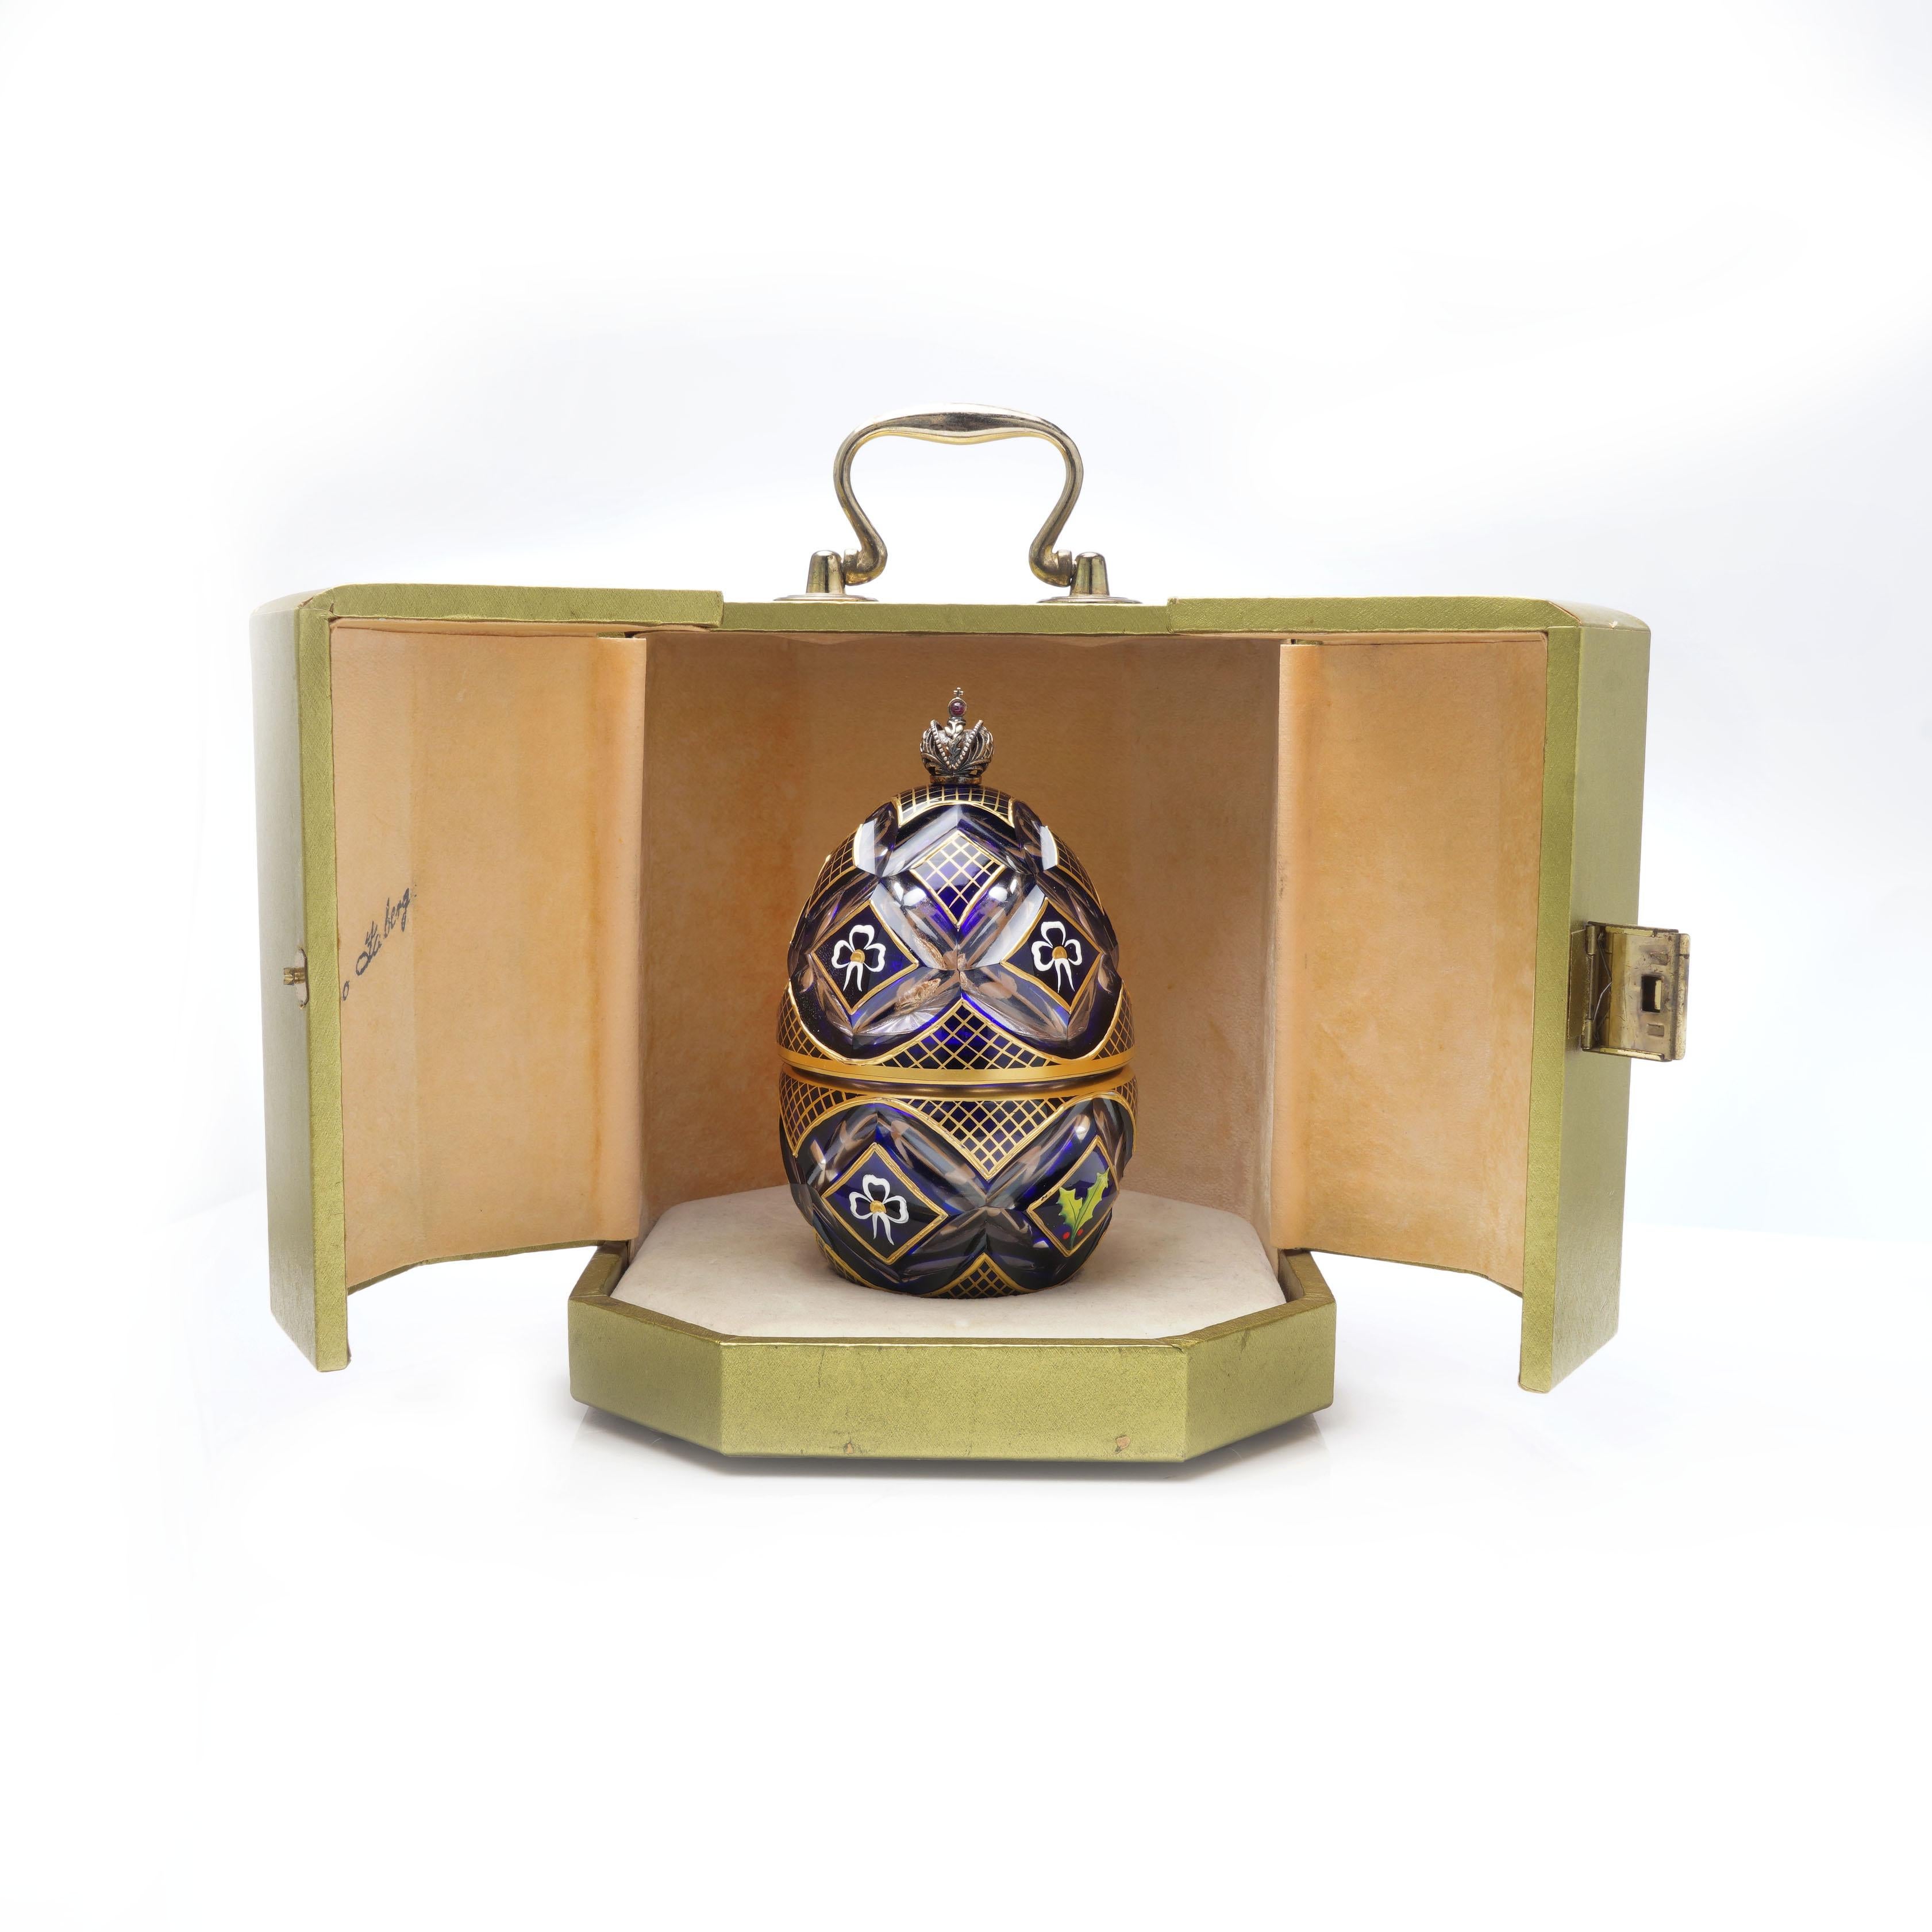 Limited edition Nr.124 The winter egg music box by Theo Faberge.

The winter egg is a celebration of Christmas and the winter season.
Made of cobalt blue and clear crystal and set with the Imperial Crown of Russia.
Delicate bows and holly